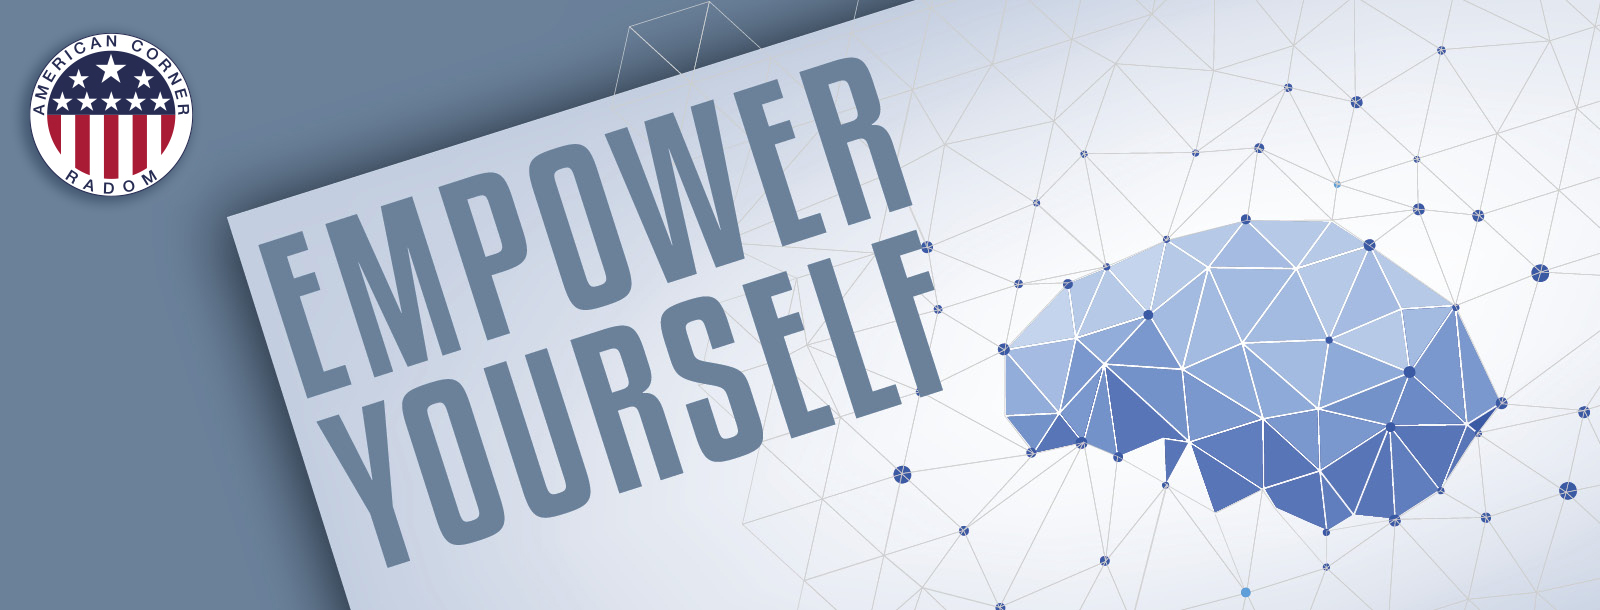 EMPOWER YOURSELF - 